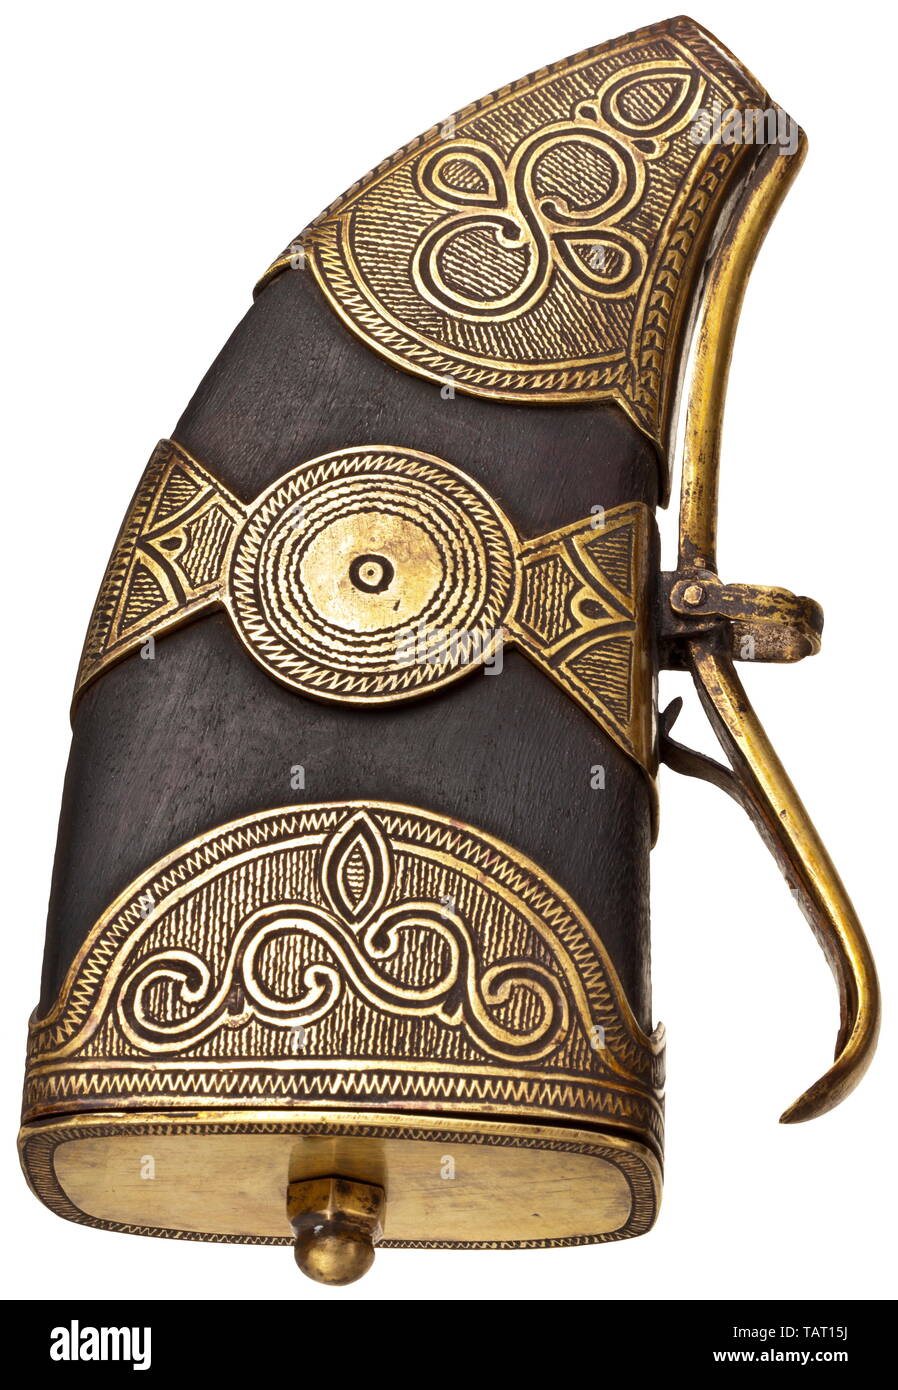 A Kyrgyz powder horn, mid-19th century, Body of flattened, black horn with ornamentally engraved brass mounting. Spring-loaded spout at top and screw-mounted lid at back. Length 17 cm. Cf. Yurij Miller, Caucasian Arms from the State Hermitage Museum, St. Petersburg, 1999, p. 197. Ottoman, Orient, Oriental, Asia, Asian, historic, historical 19th century, Additional-Rights-Clearance-Info-Not-Available Stock Photo